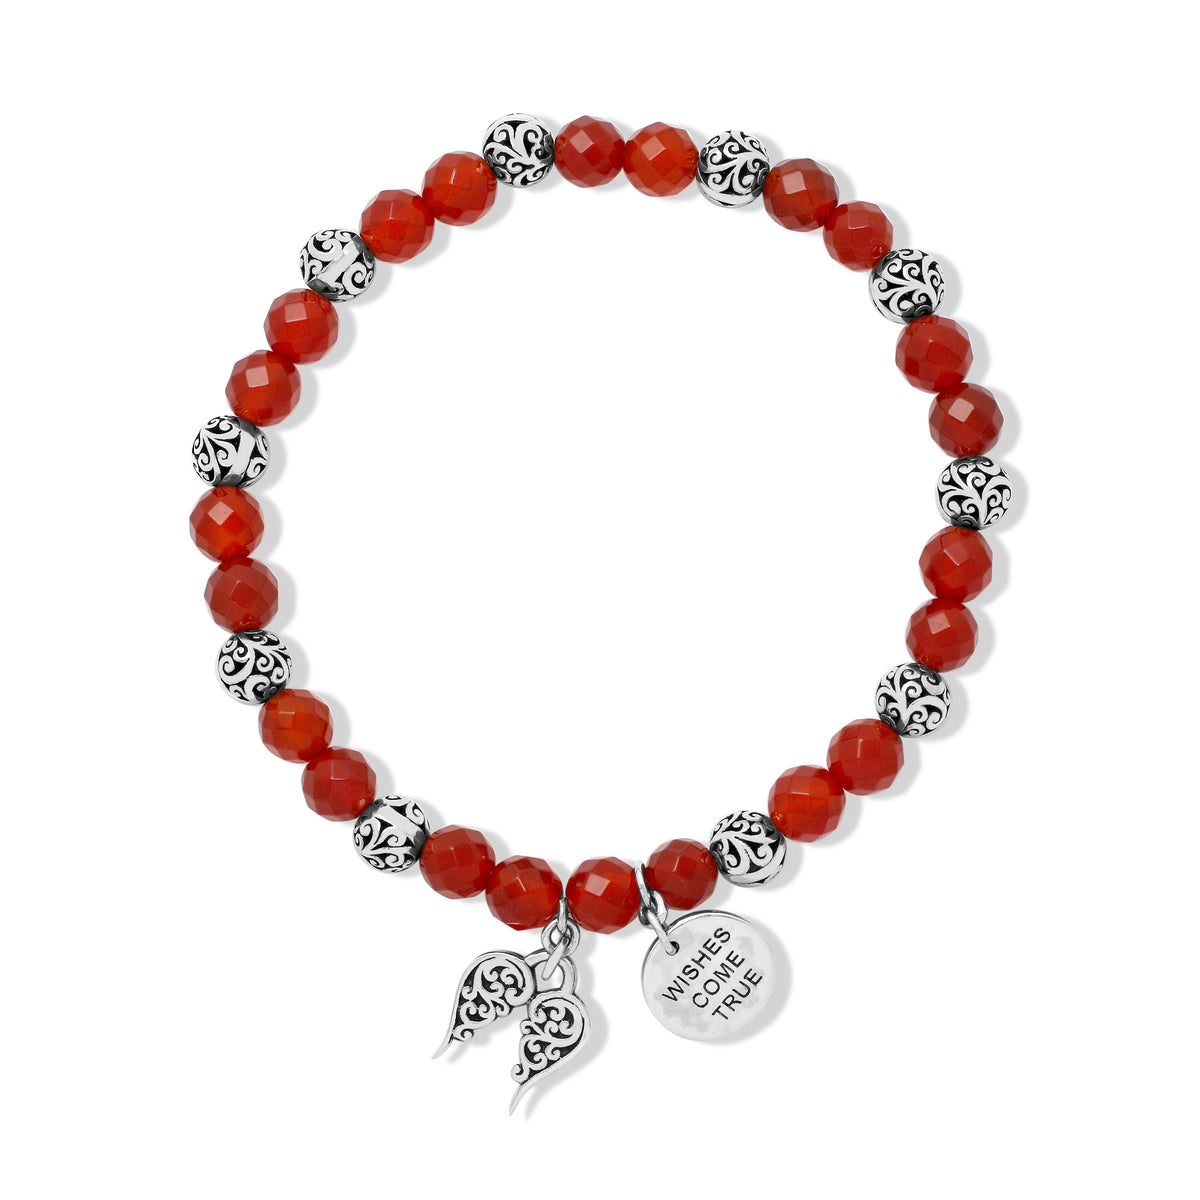 "Wishes Come True" 6mm LH Signature Scroll and Red Carnelian Beads Stretch Bracelet